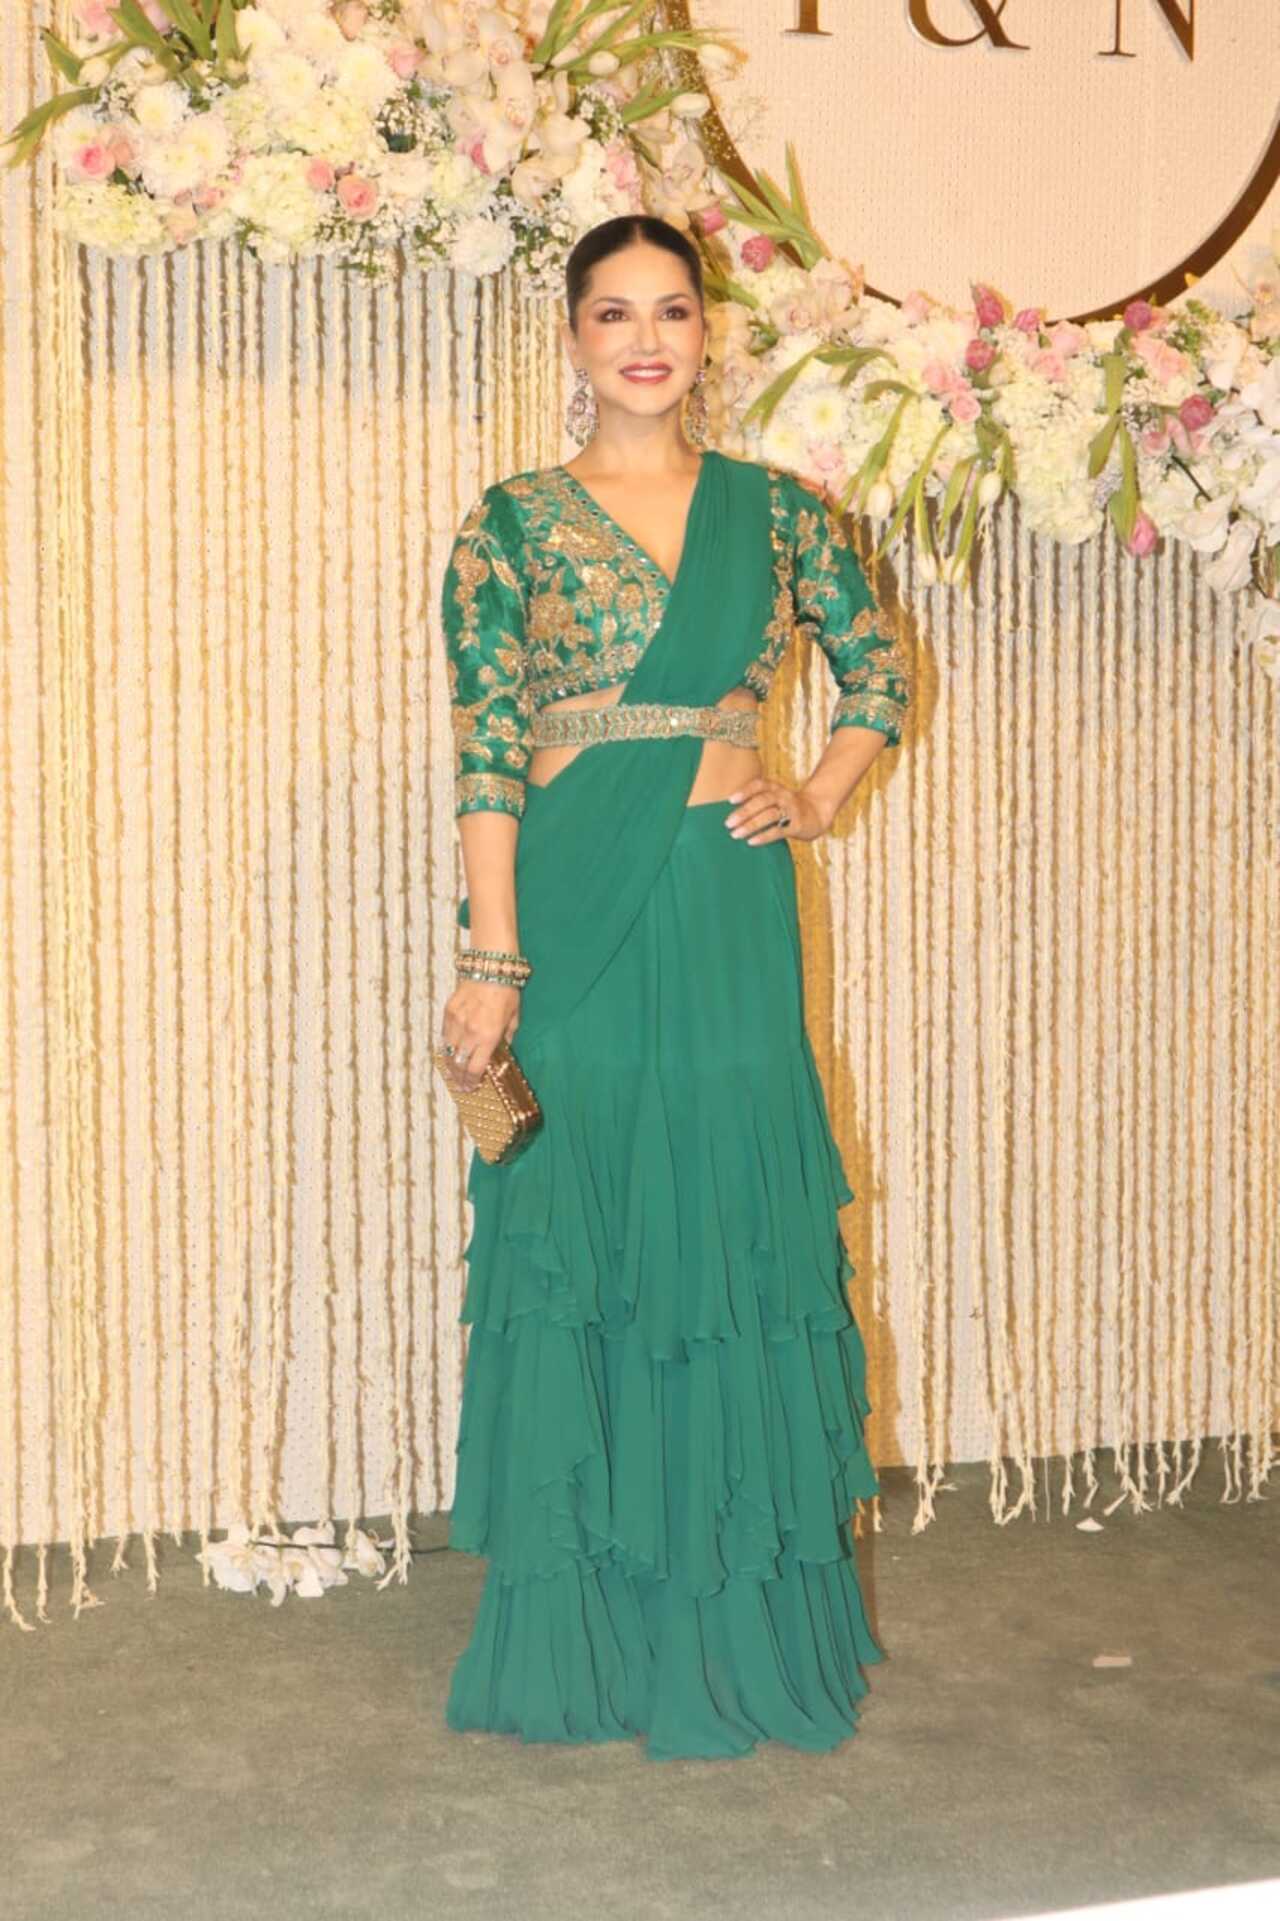 Sunny Leone looked lovely in this bright green saree with a stunning blouse. She completed the saree look with a thick belt